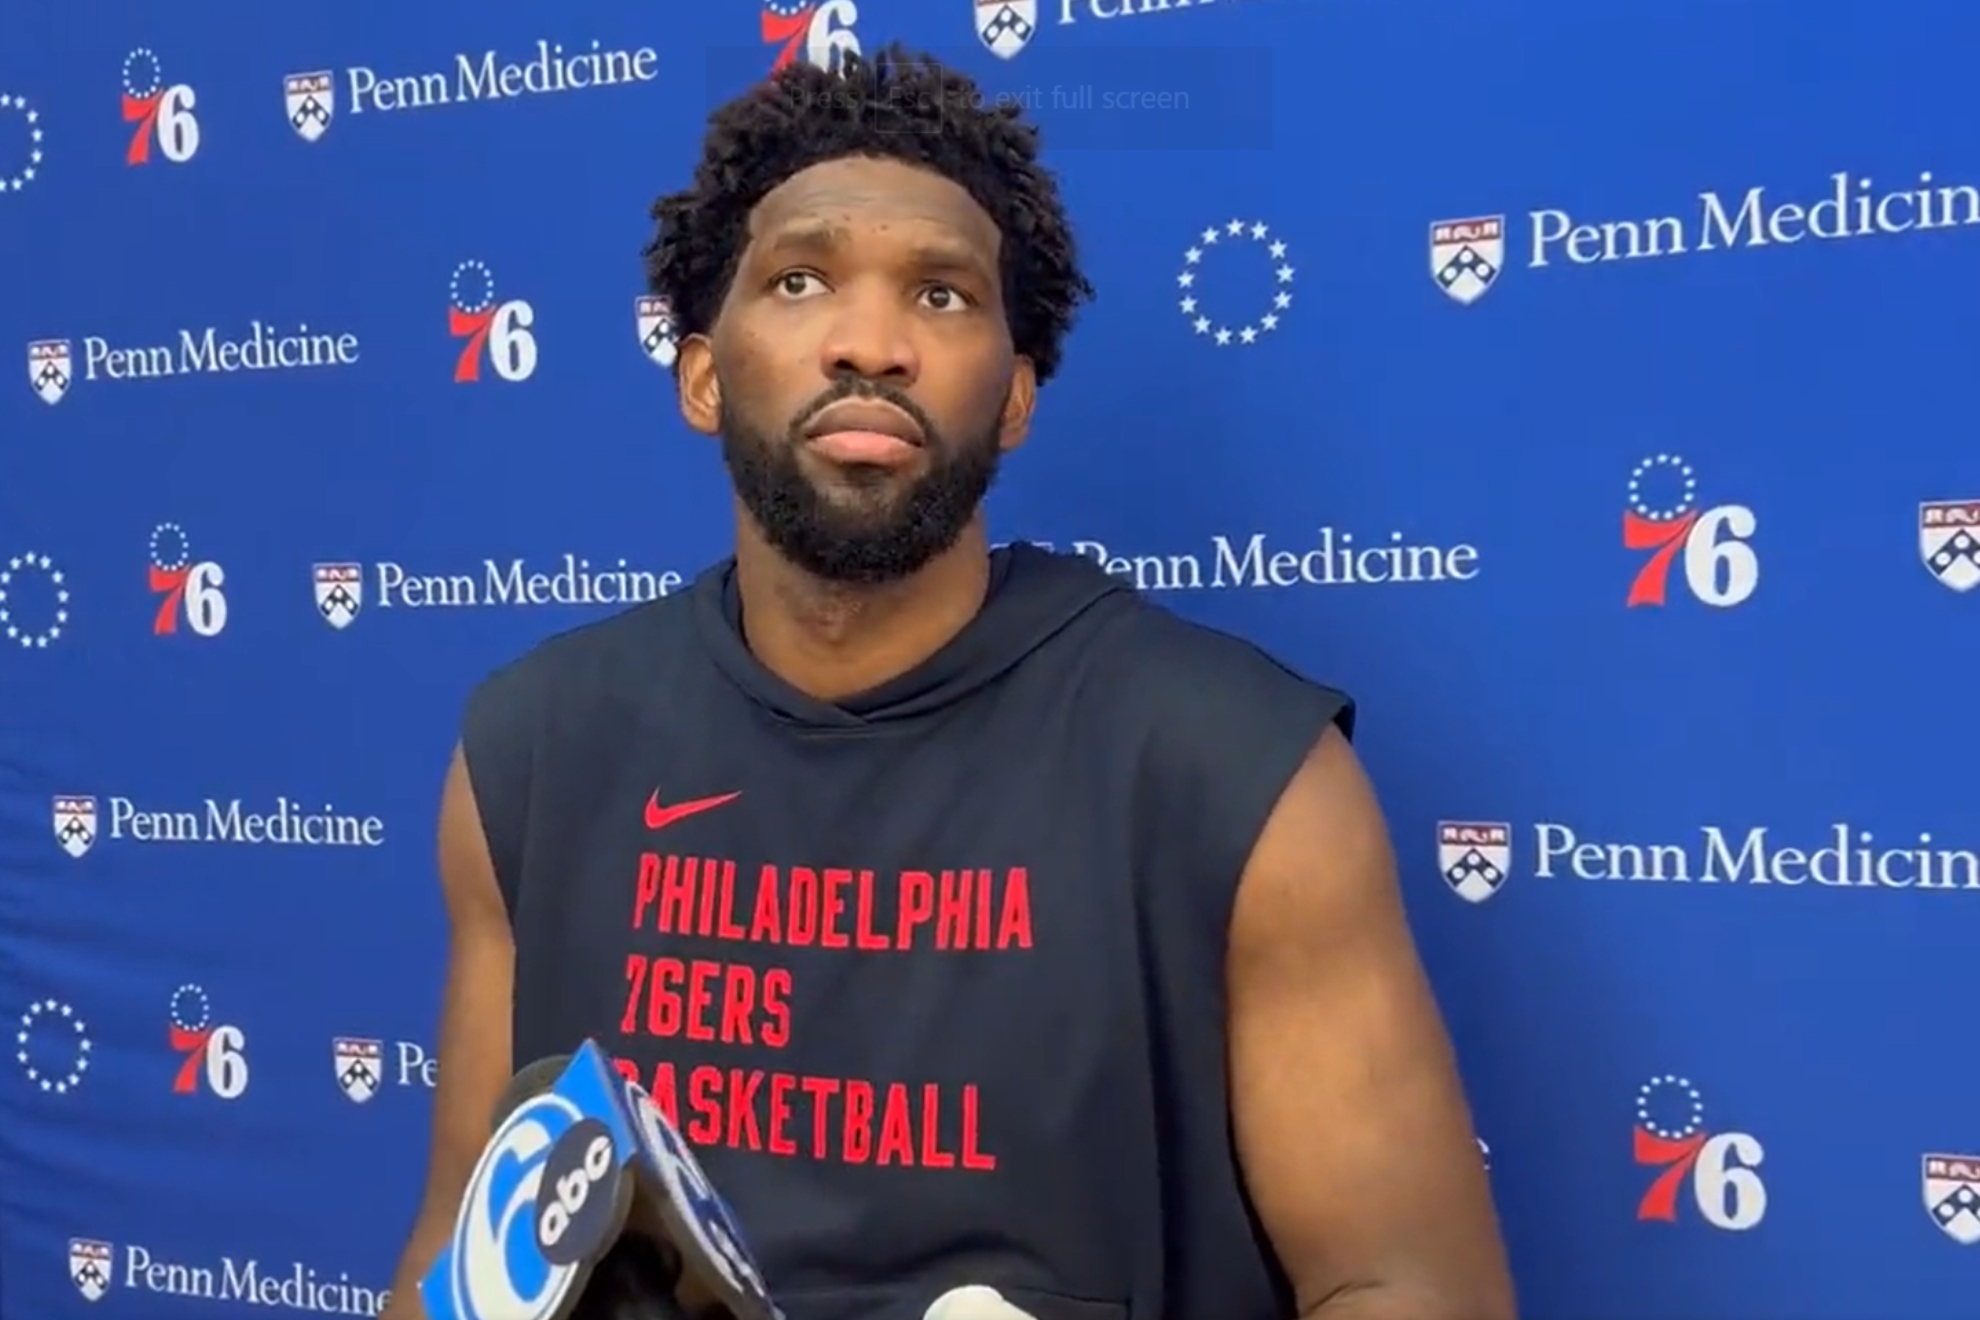 Embiid responded to James not being present